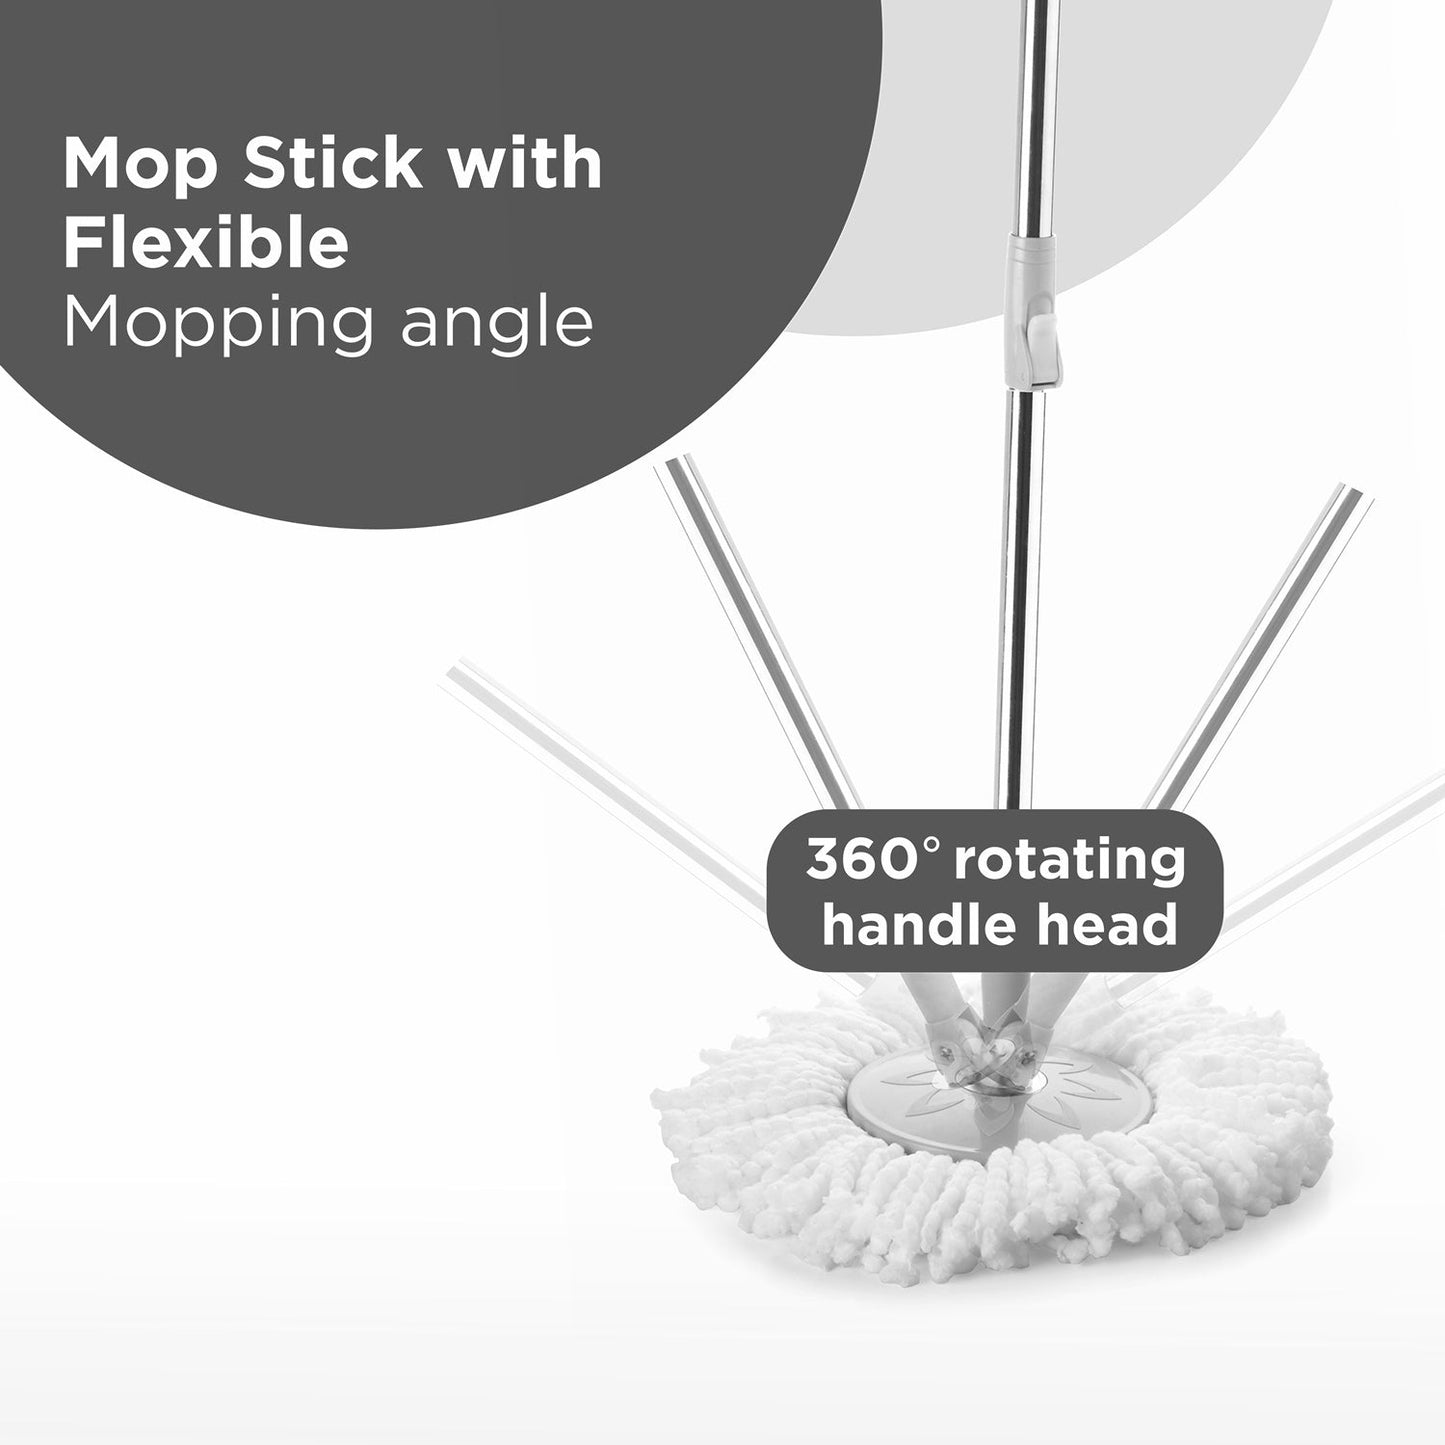 1185 Mop with Bucket For Floor Cleaning With Steel Spin /Mop for Floor Cleaning / Floor Cleaner Mop / Spin Mop / Magic Mop / Mop Stick / Spin Mop Set with Bucket 